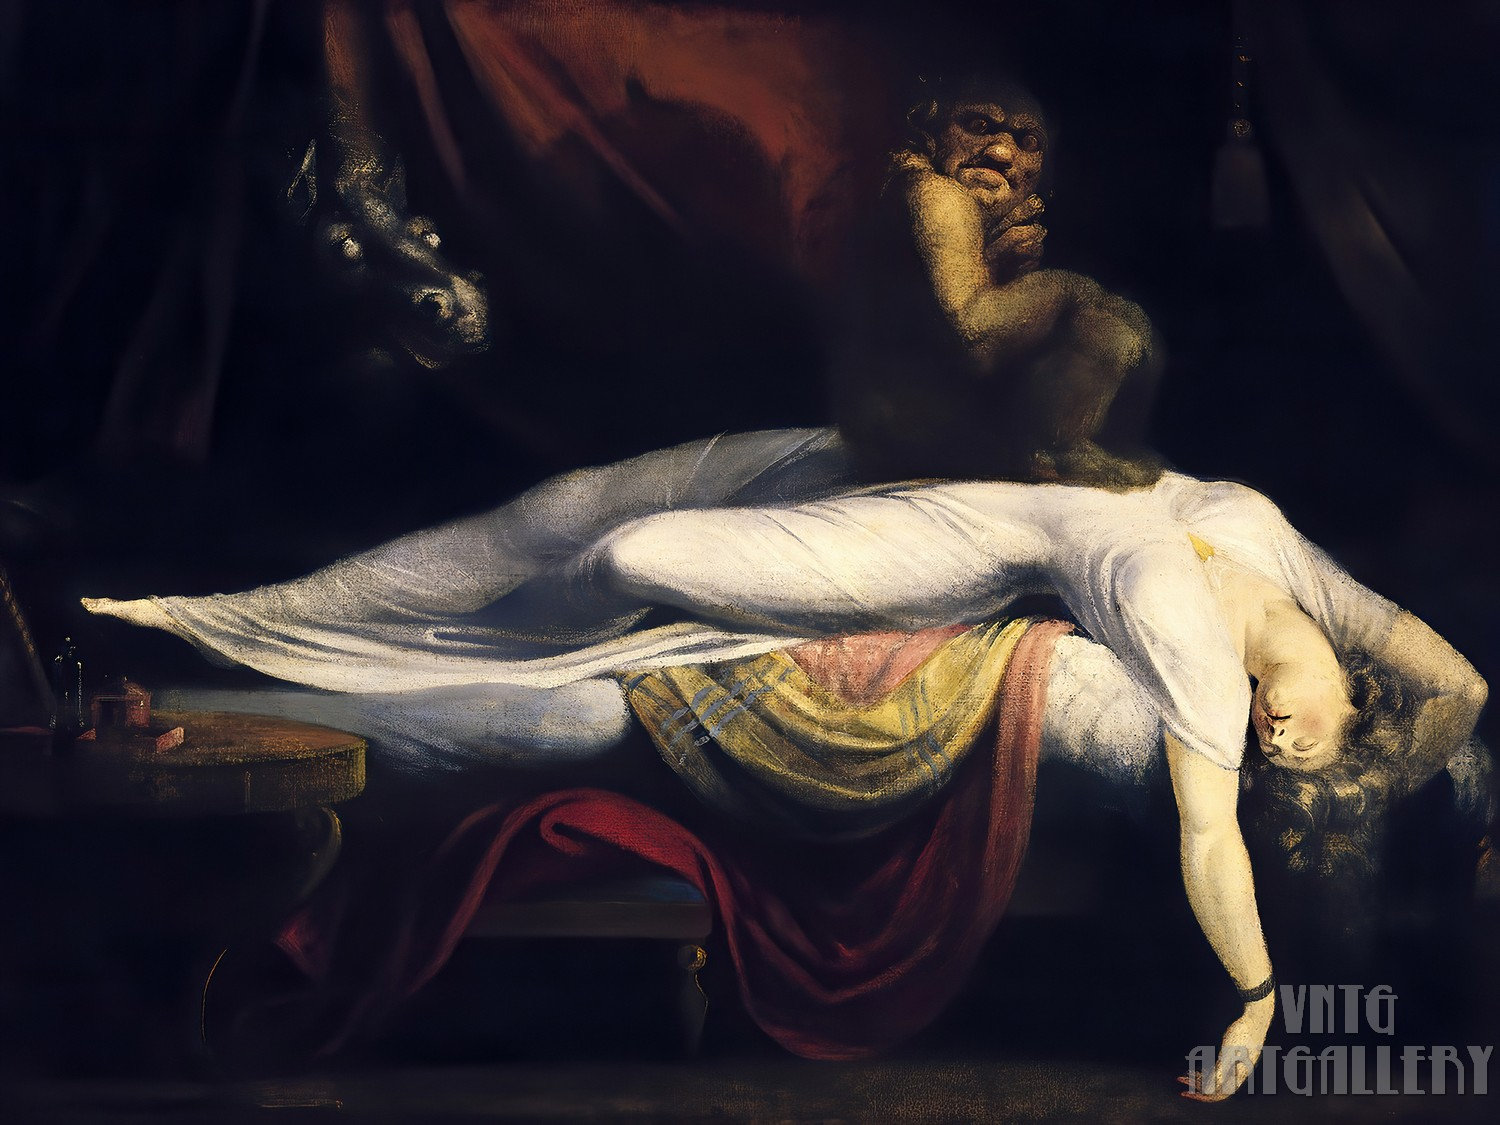 The Nightmare Antique Poster John Henry Fuseli Print Art Vintage Canvas  Painting Decor Religion Wall Picture - Painting & Calligraphy - AliExpress